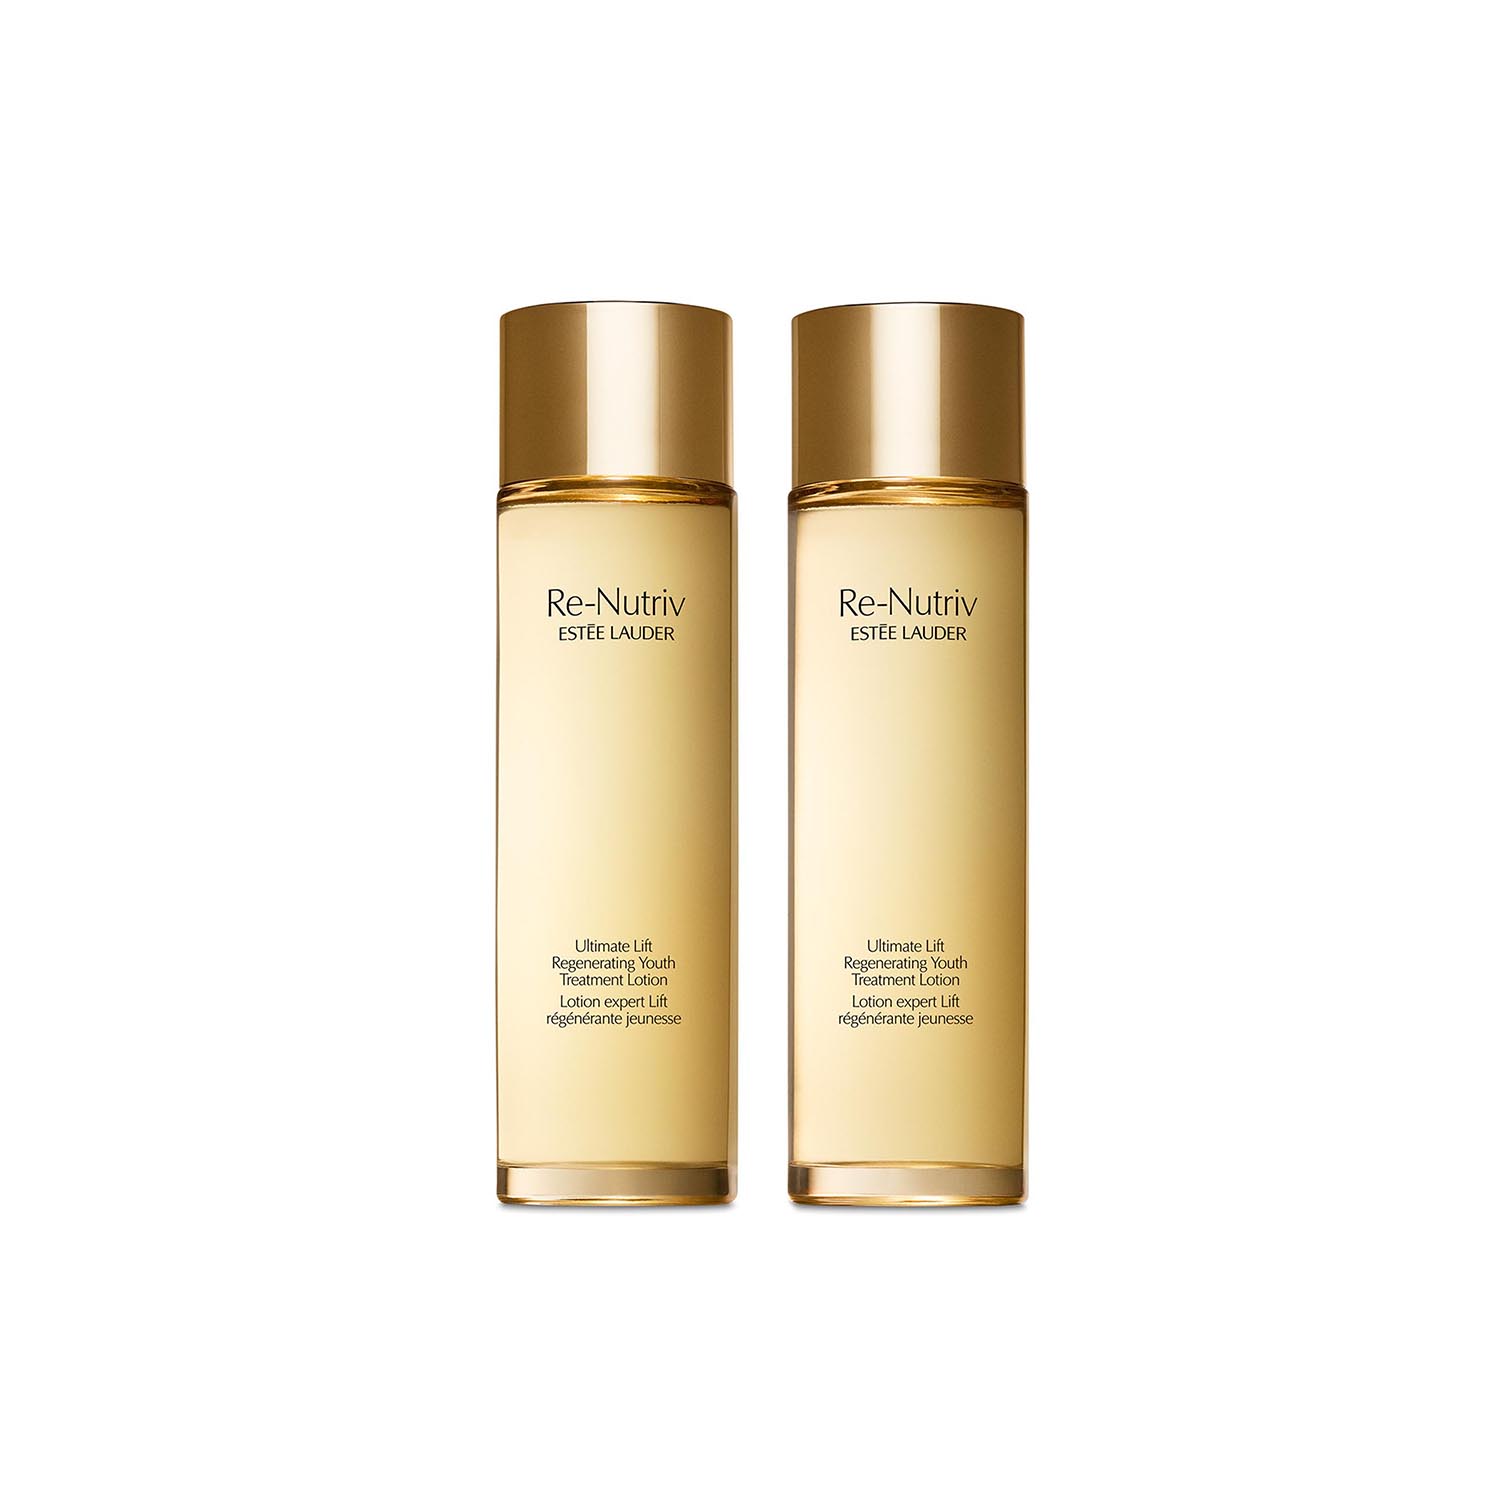 Re-Nutriv Ultimate Lift Regenerating Youth Treatment Lotion Duo